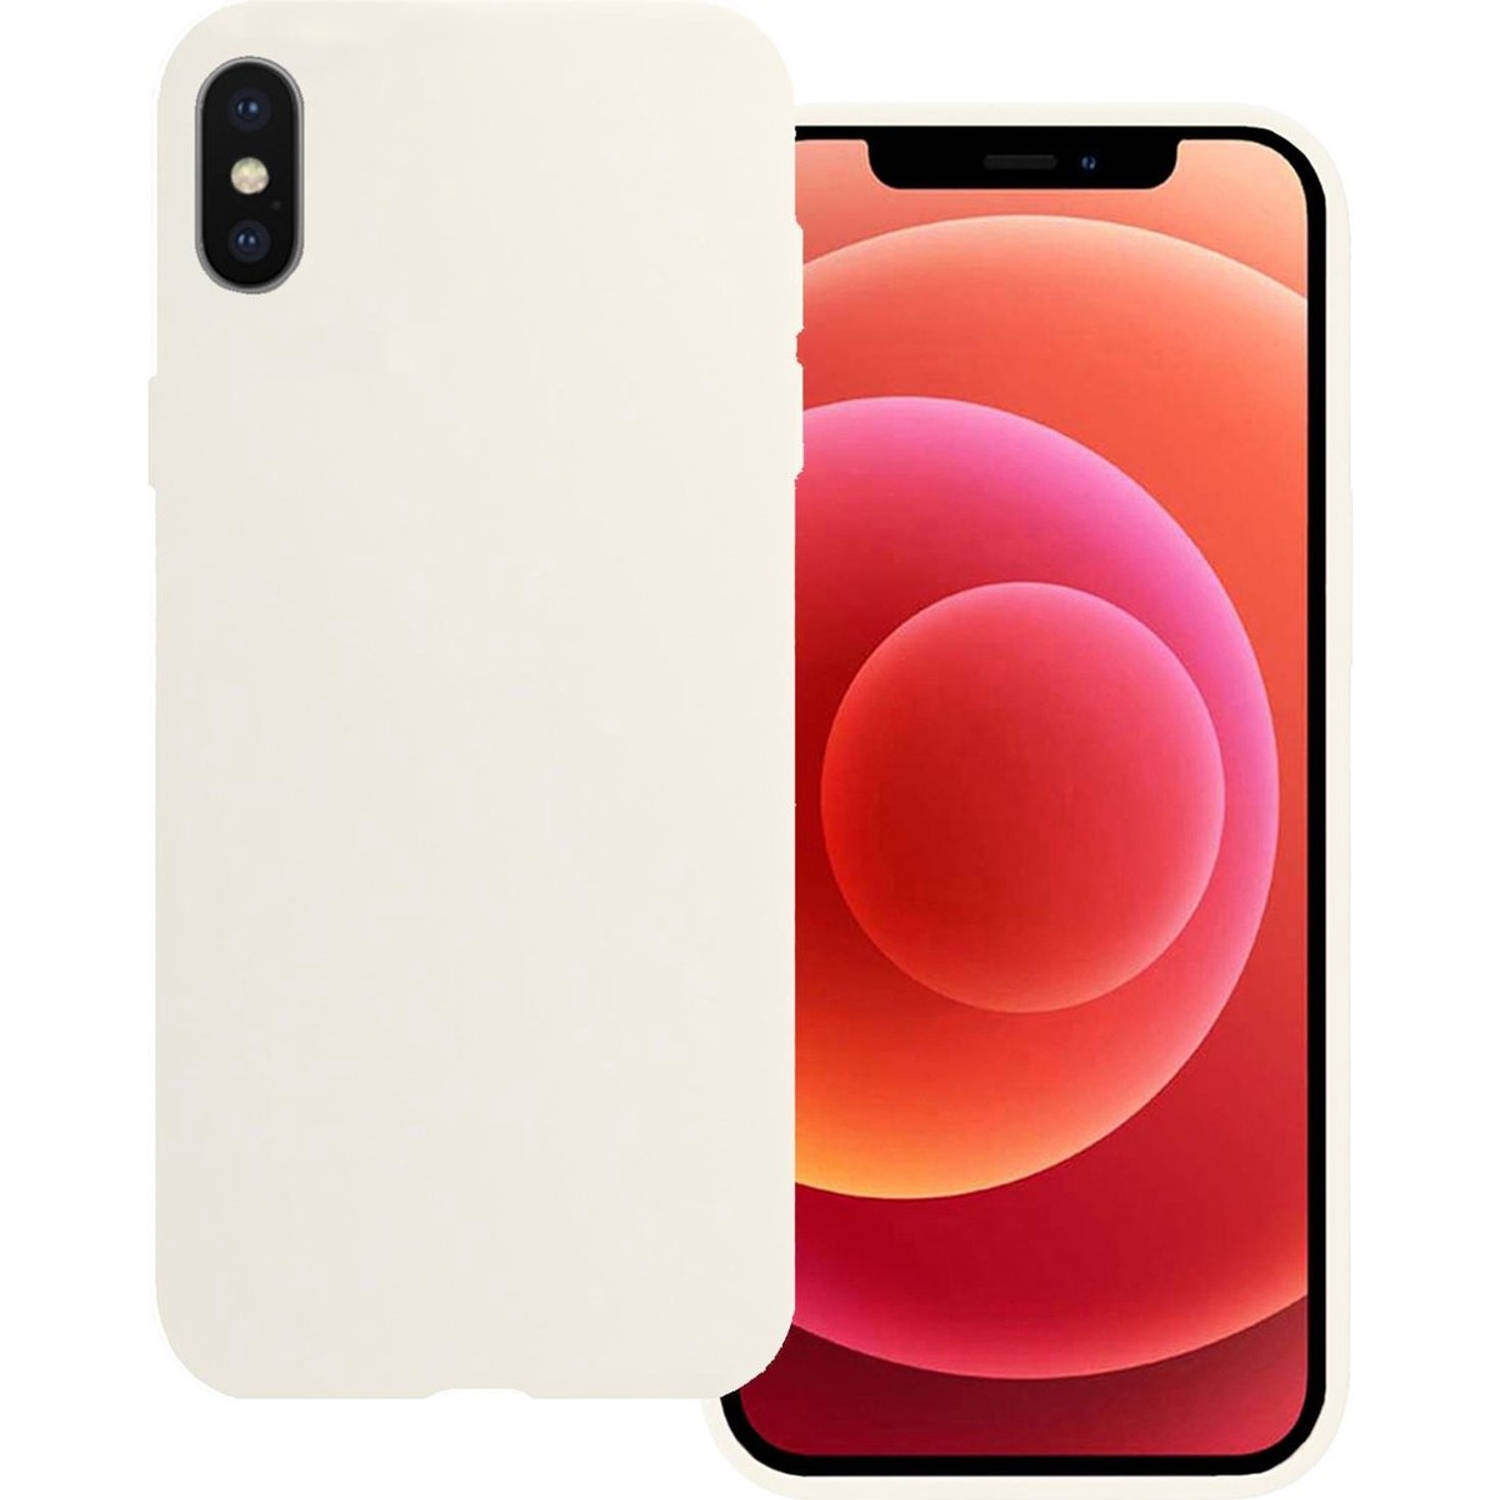 Basey iPhone Xs Max Hoesje Siliconen - iPhone Xs Max Hoes Siliconen Case - Wit